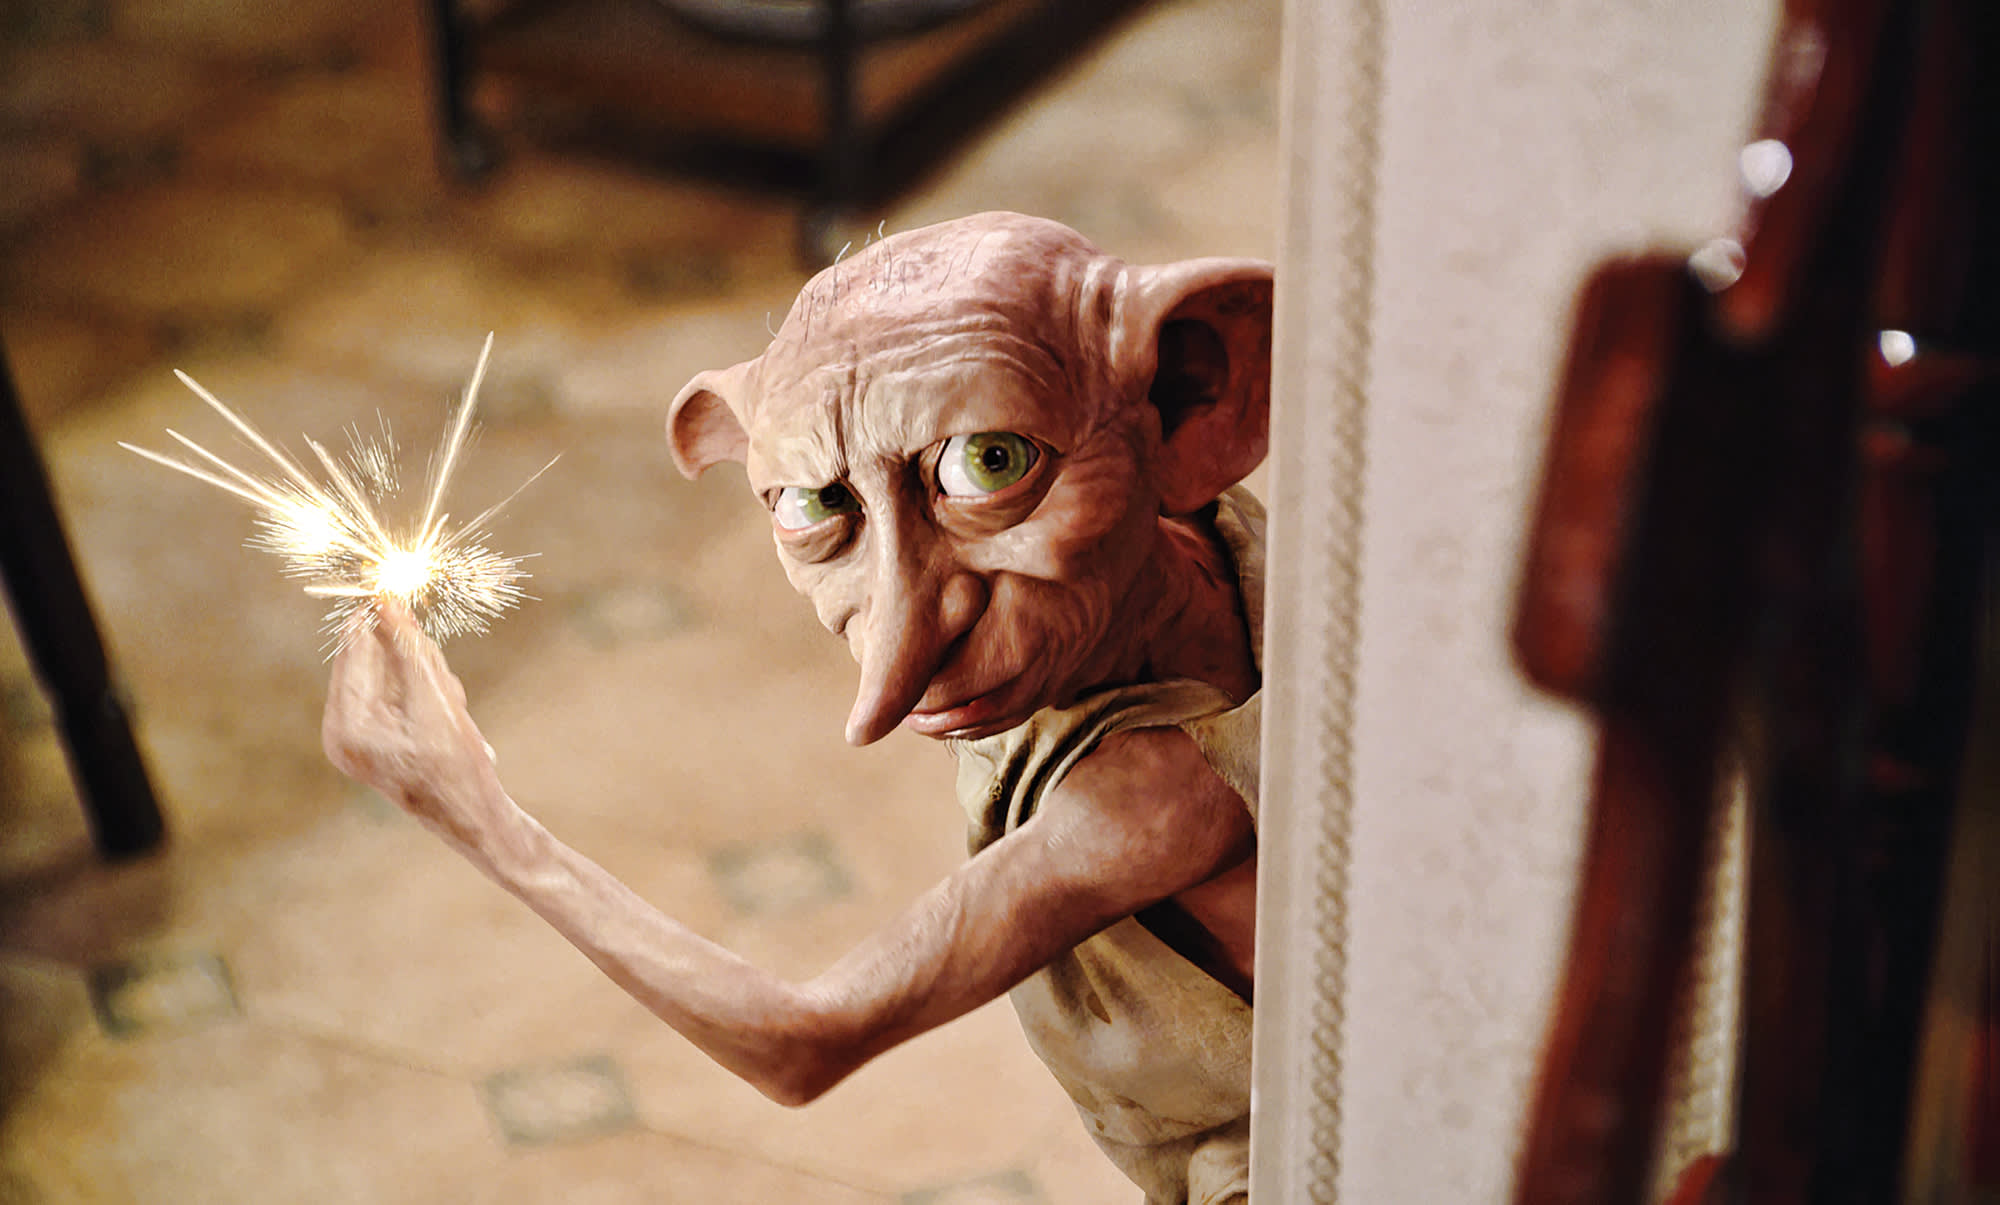 Dobby is looking round a doorway in 4 Privet Drive. He is using magic and snapping his fingers which causes a spark.